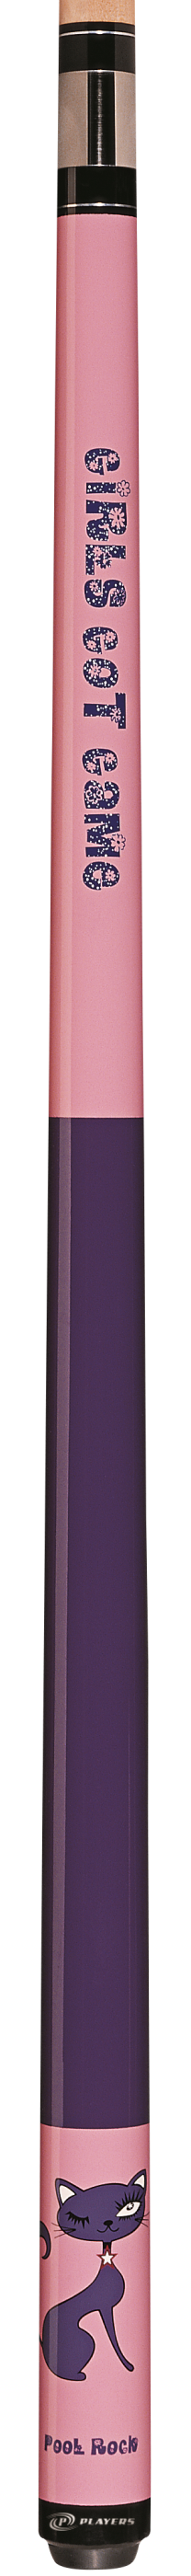 Players Y-G02-52 Youth Cue 52" Pool Cue -Players